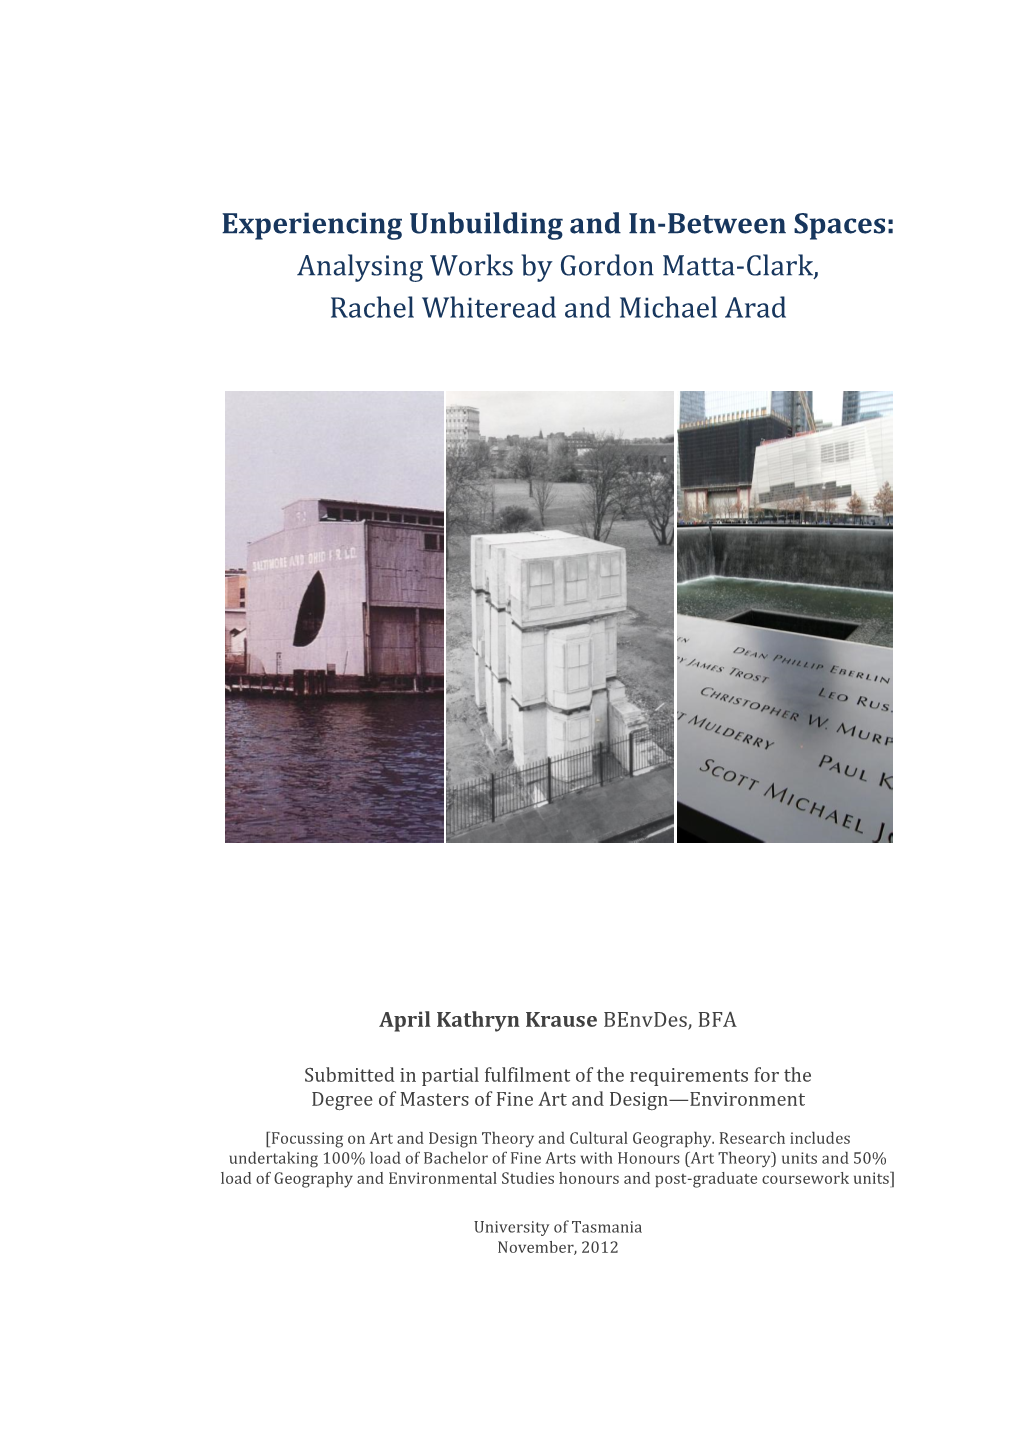 Experiencing Unbuilding and In-Between Spaces: Analysing Works by Gordon Matta-Clark, Rachel Whiteread and Michael Arad